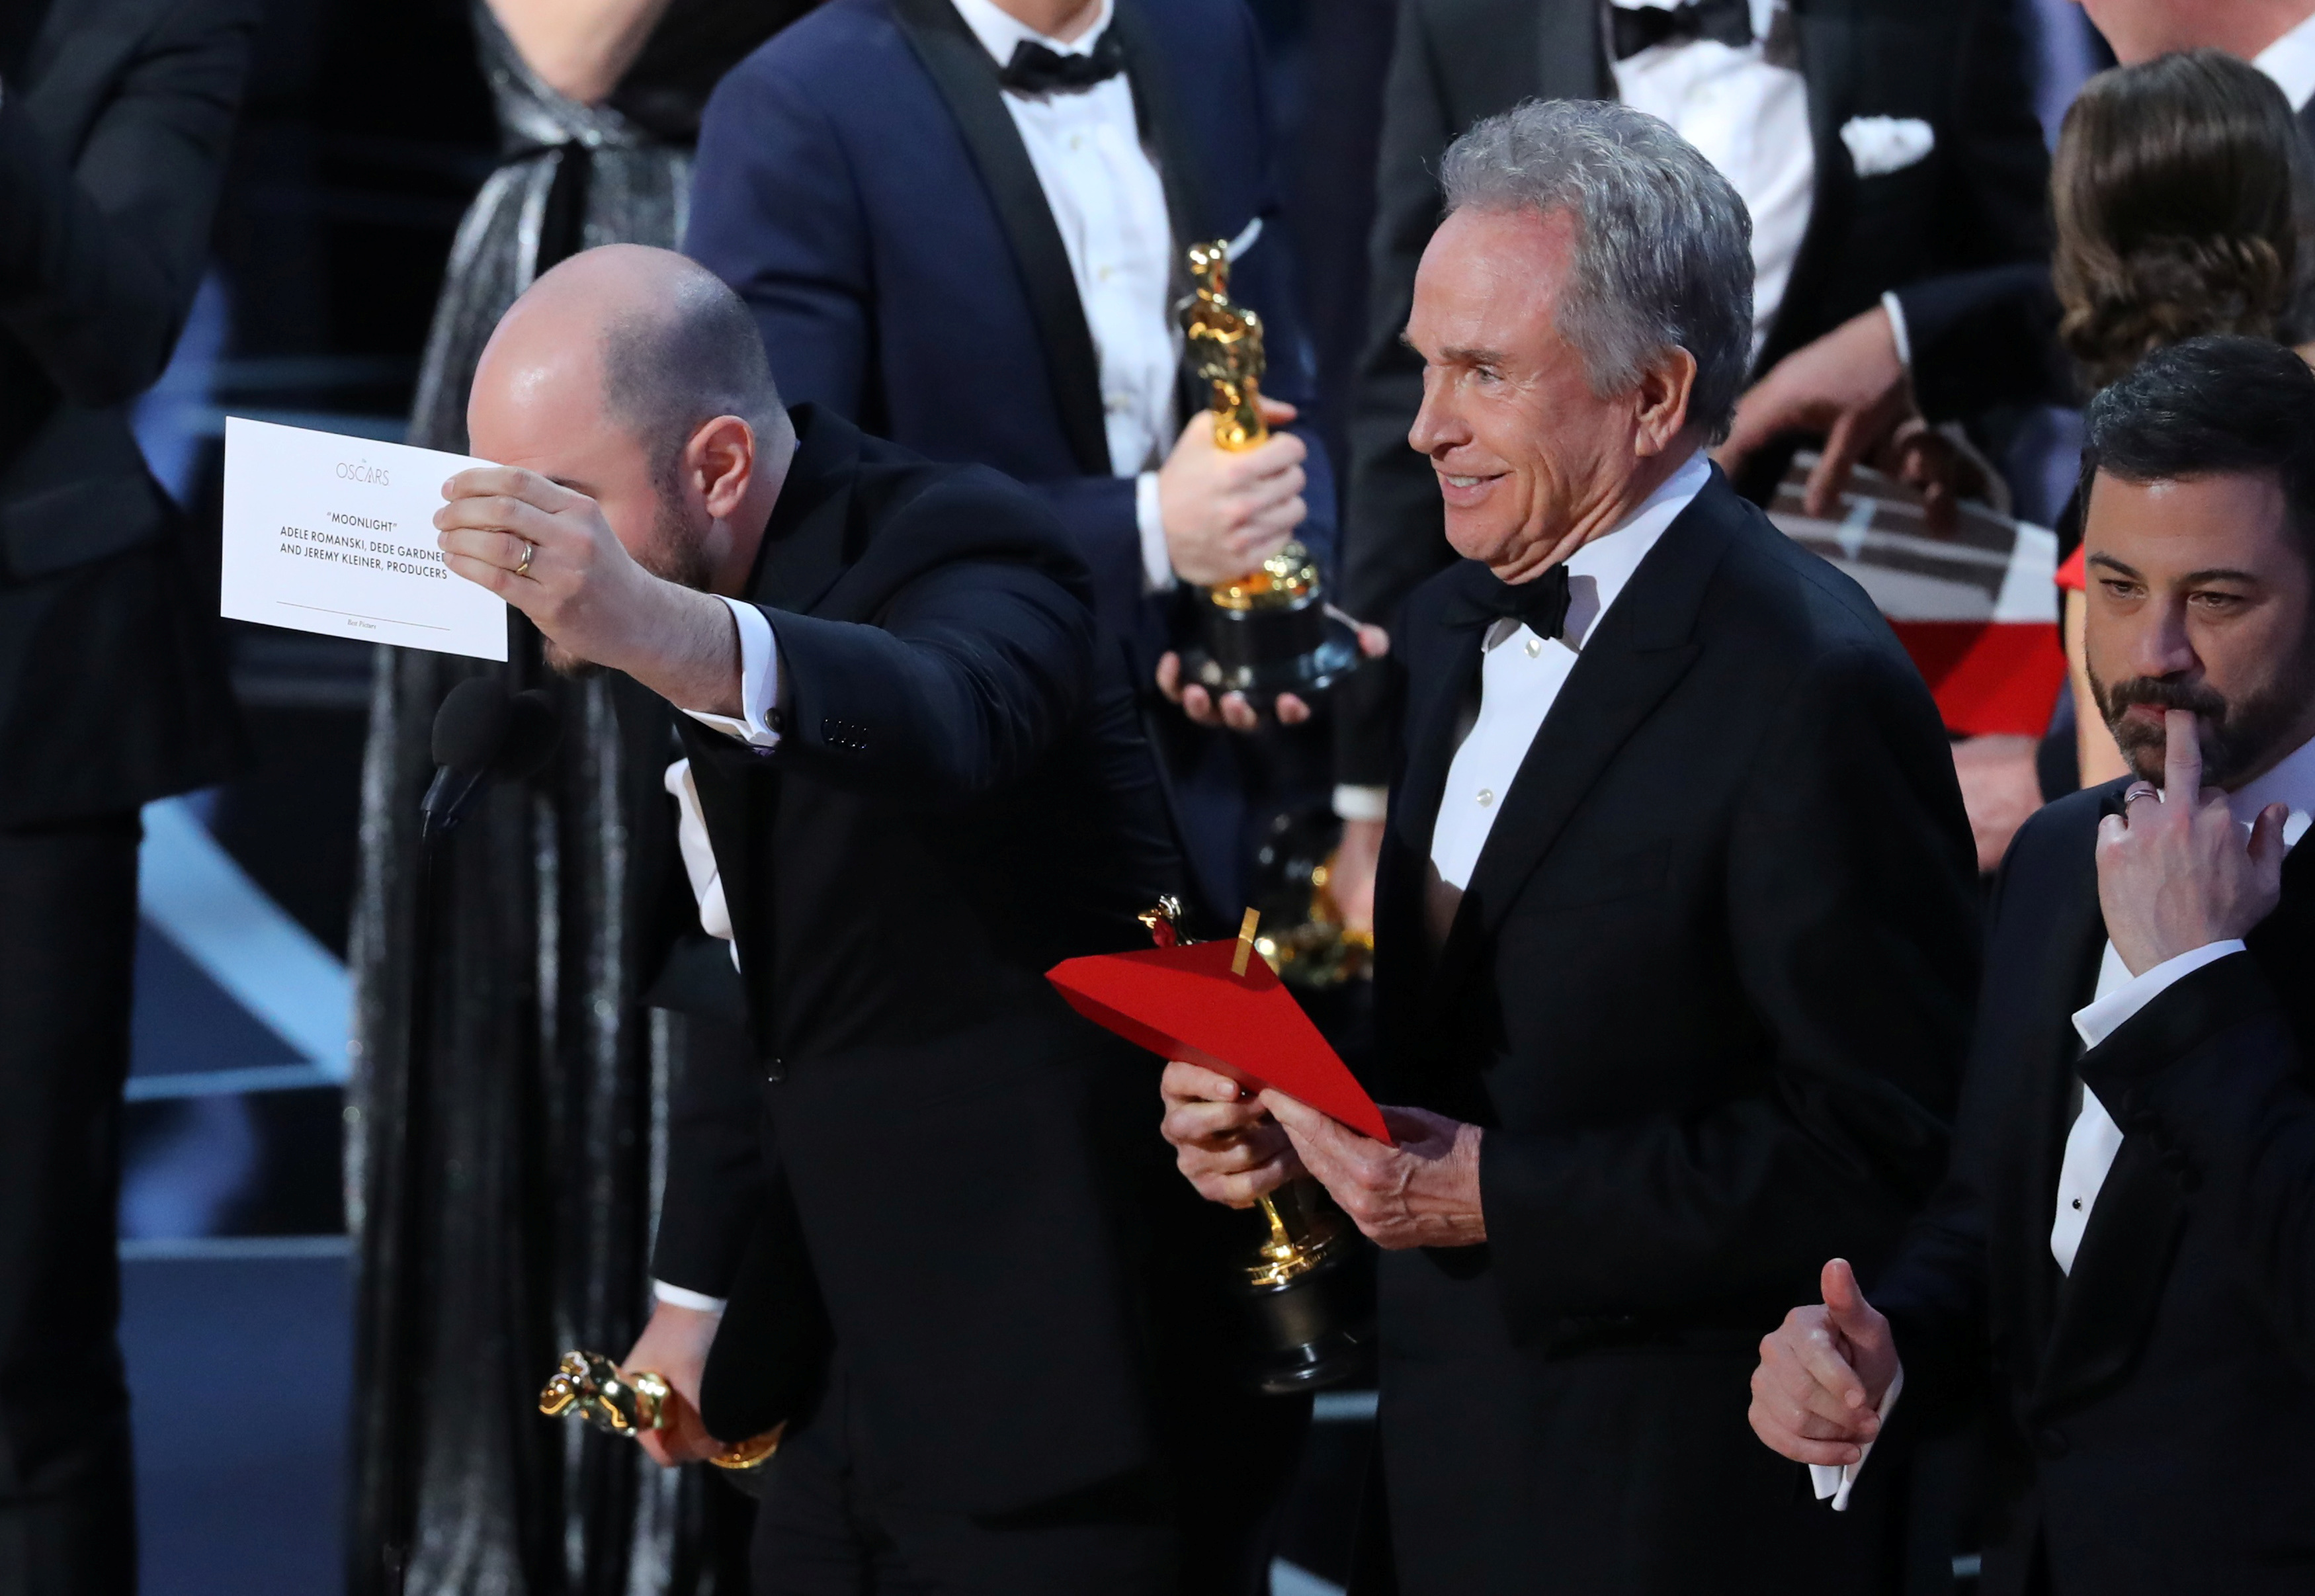 Jordan Horowitz of "La La Land" holds the card announcing "Moonlight" as the winner of the Oscar for Best Picture Warren Beatty and Jimmy Kimmel (Reuters)